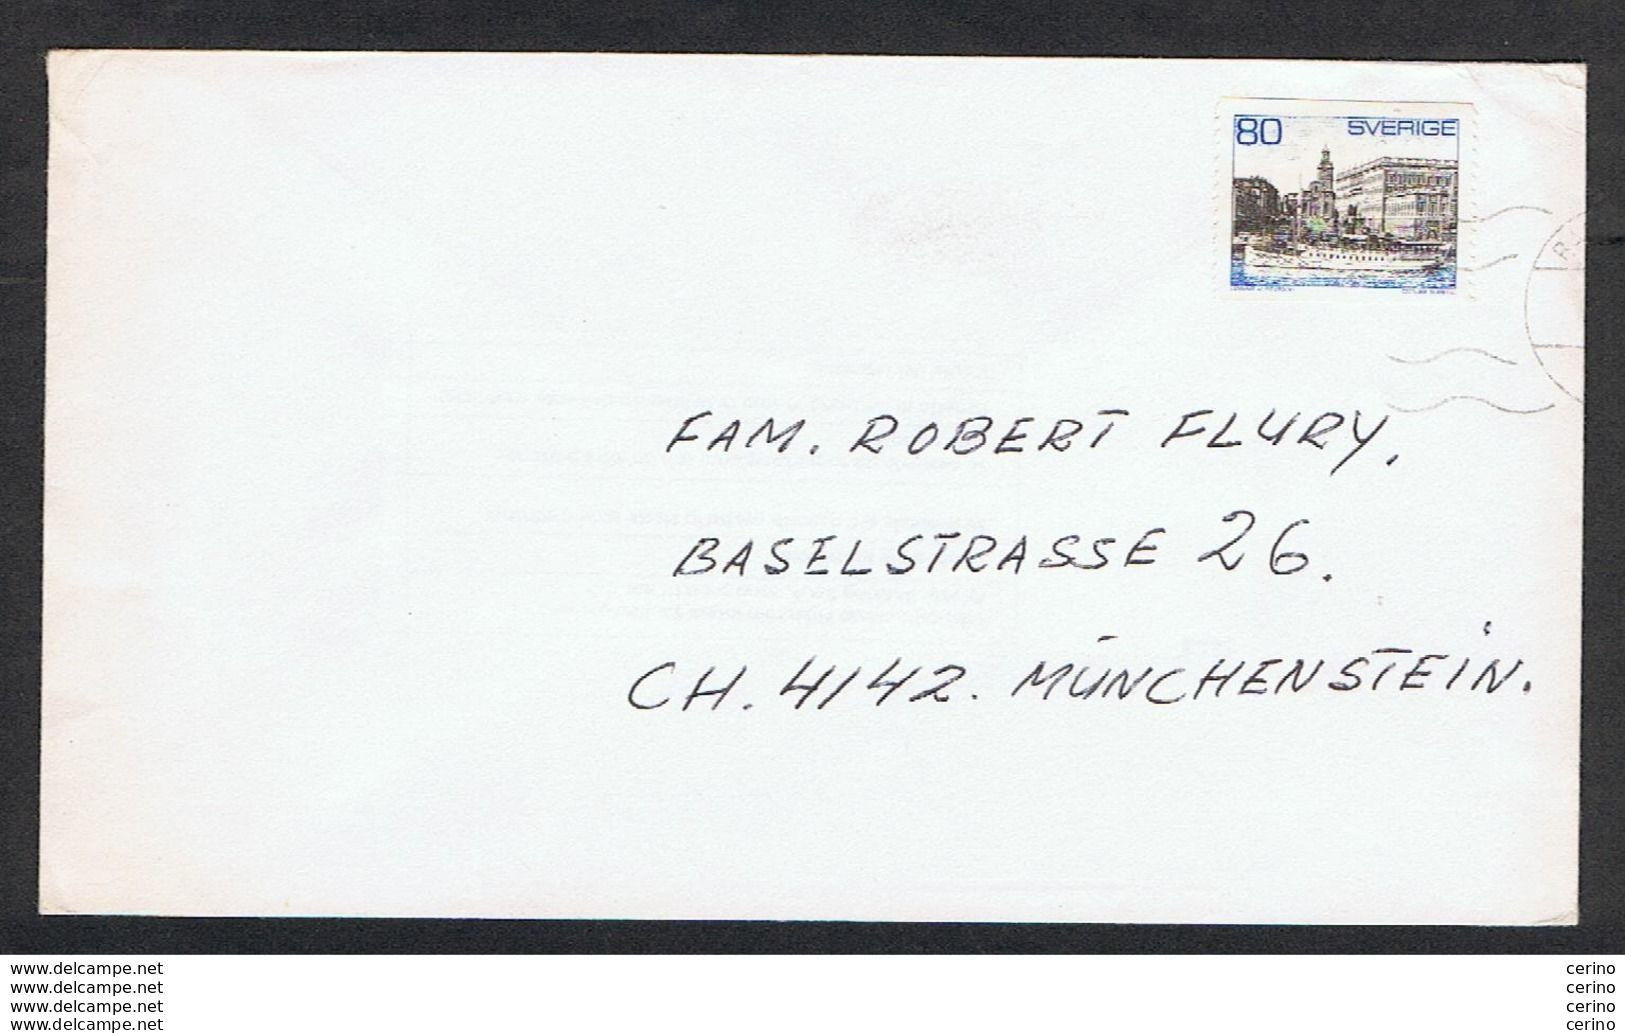 SWEDEN: 1971 COVERT WITH STEAM BOAT 80 O. (681) - TO SWITZERLAND - Covers & Documents